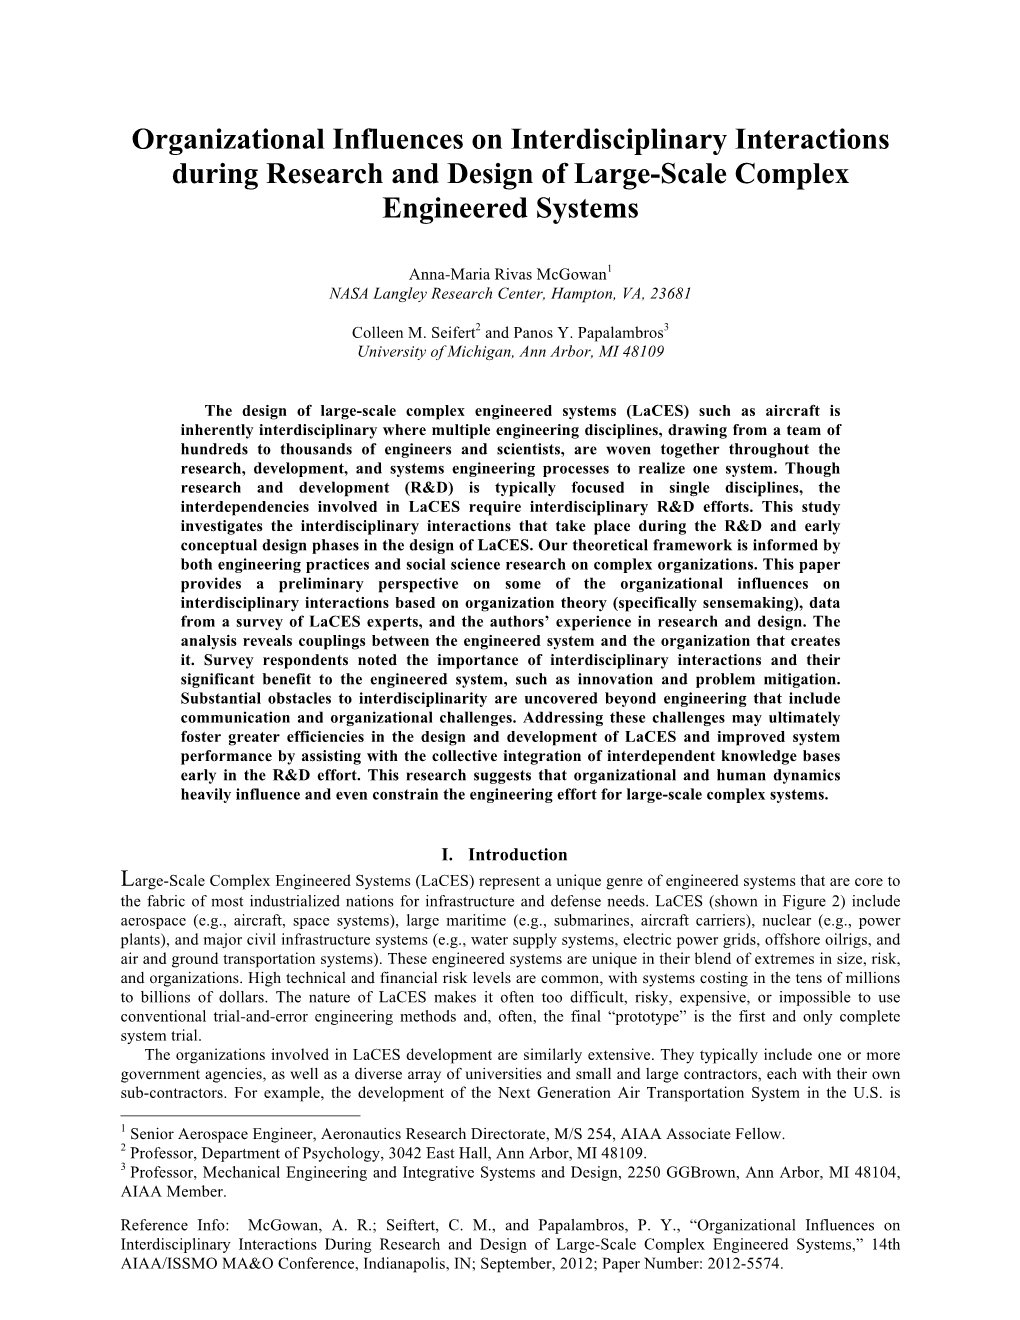 Organizational Influences on Interdisciplinary Interactions During Research and Design of Large-Scale Complex Engineered Systems